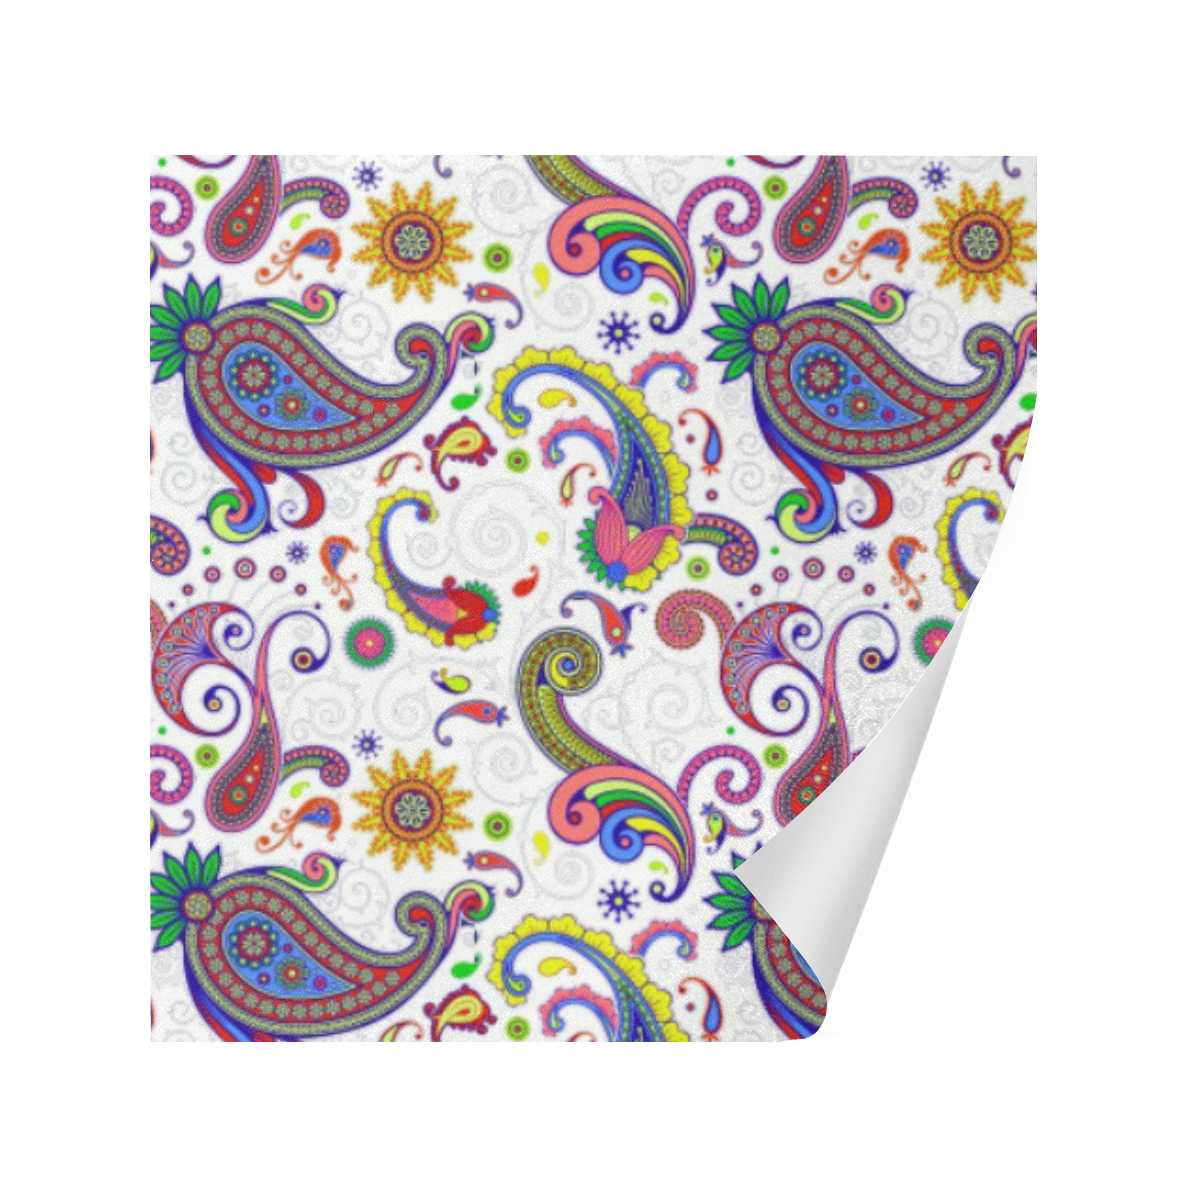 Bright paisley Gift Wrapping Paper 58"x 23" (1 Roll)